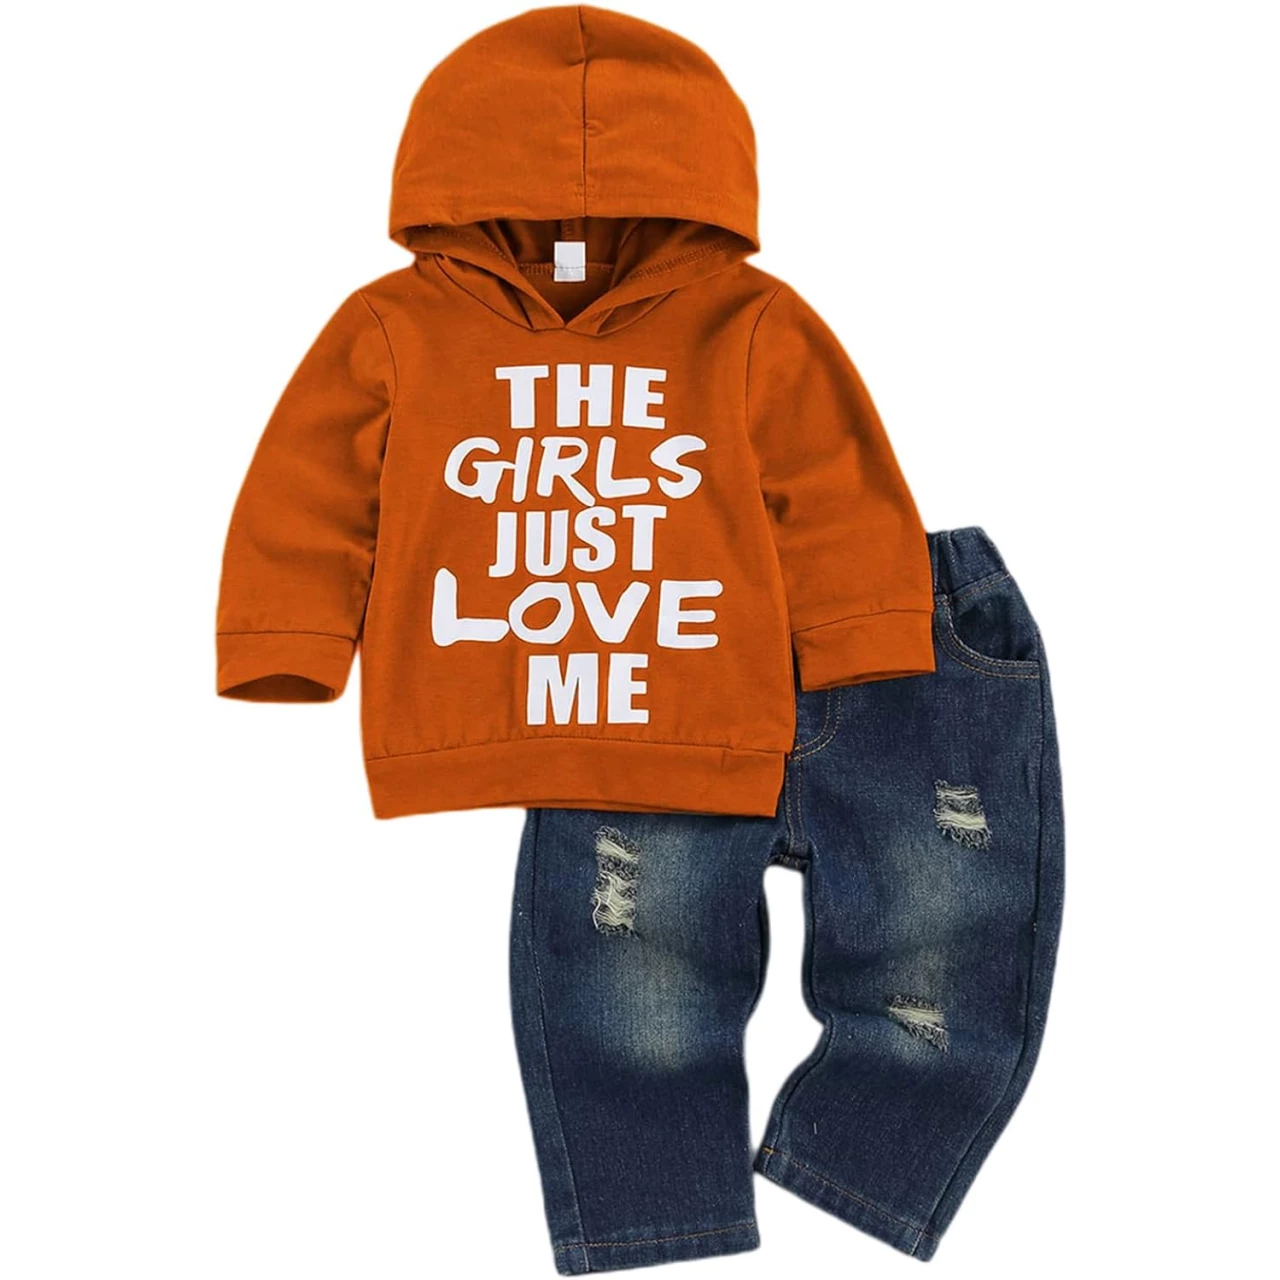 fhutpw Toddler Baby Boy Outfits Hoodie Sweatshirts &amp; Jeans Clothes Set Fall Winter 6 9 12 18 24 Months